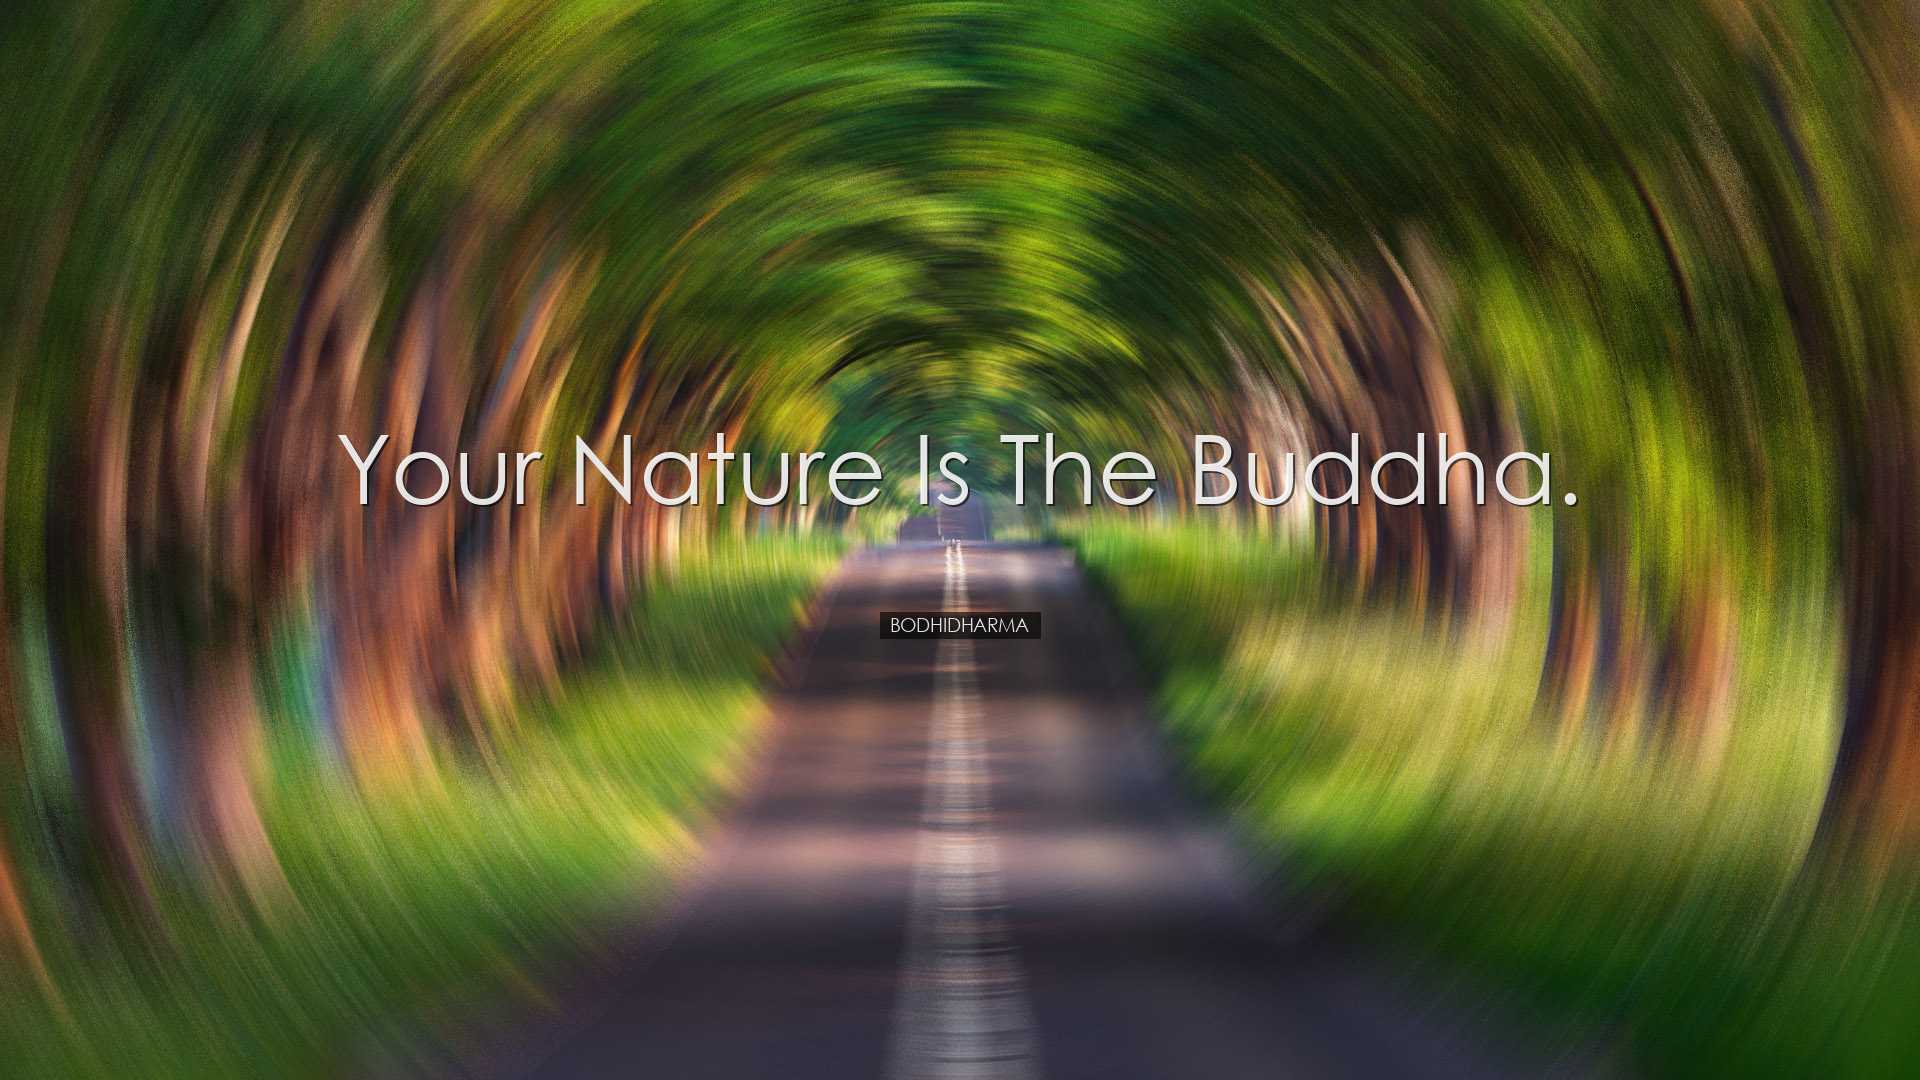 Your nature is the Buddha. - Bodhidharma